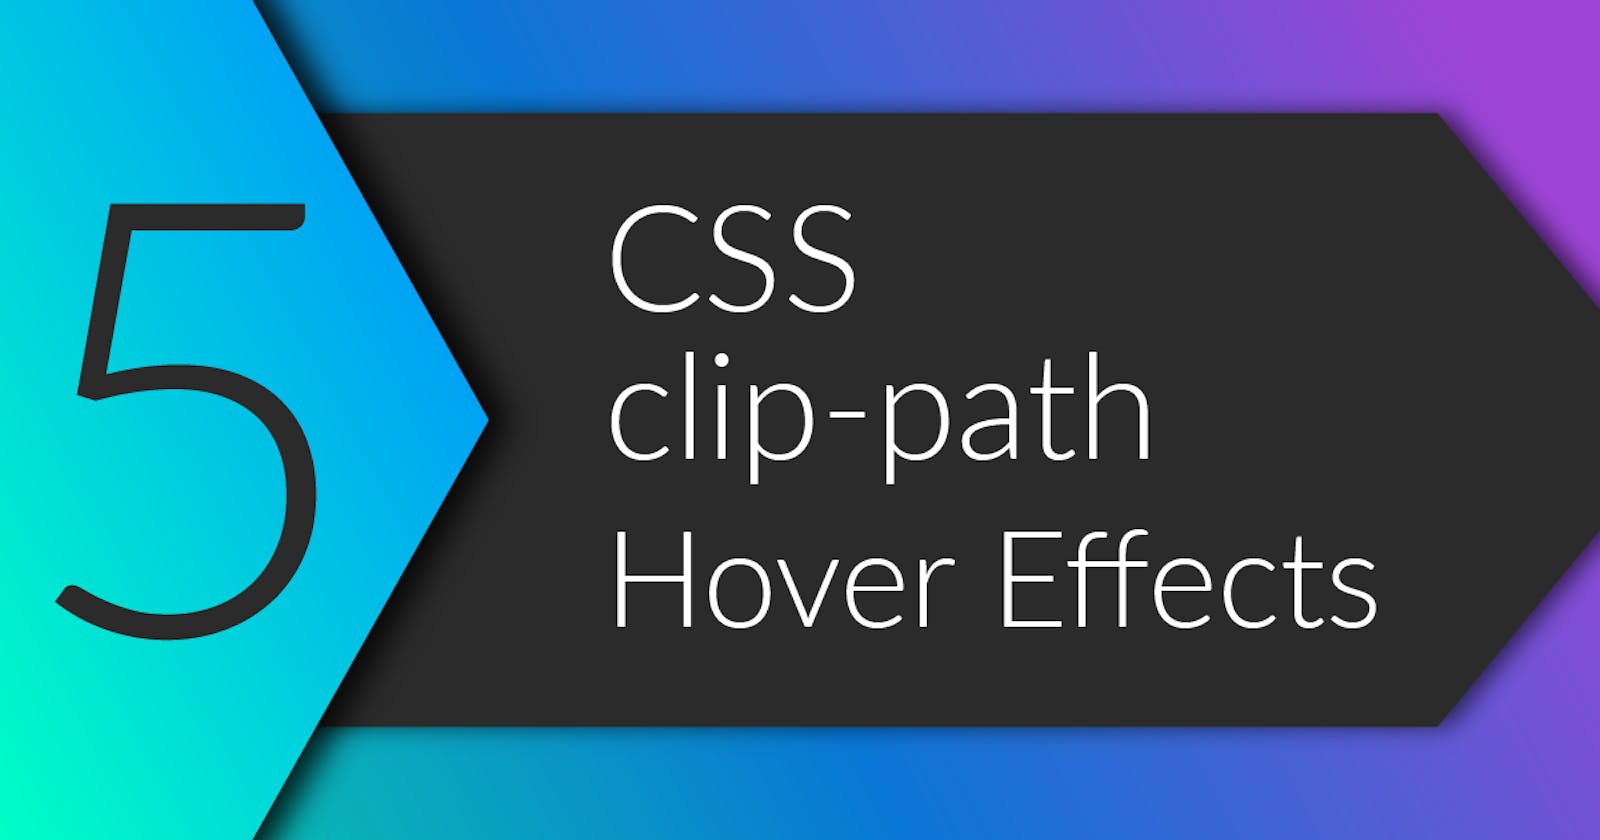 How to build 5 clip-path hover effects